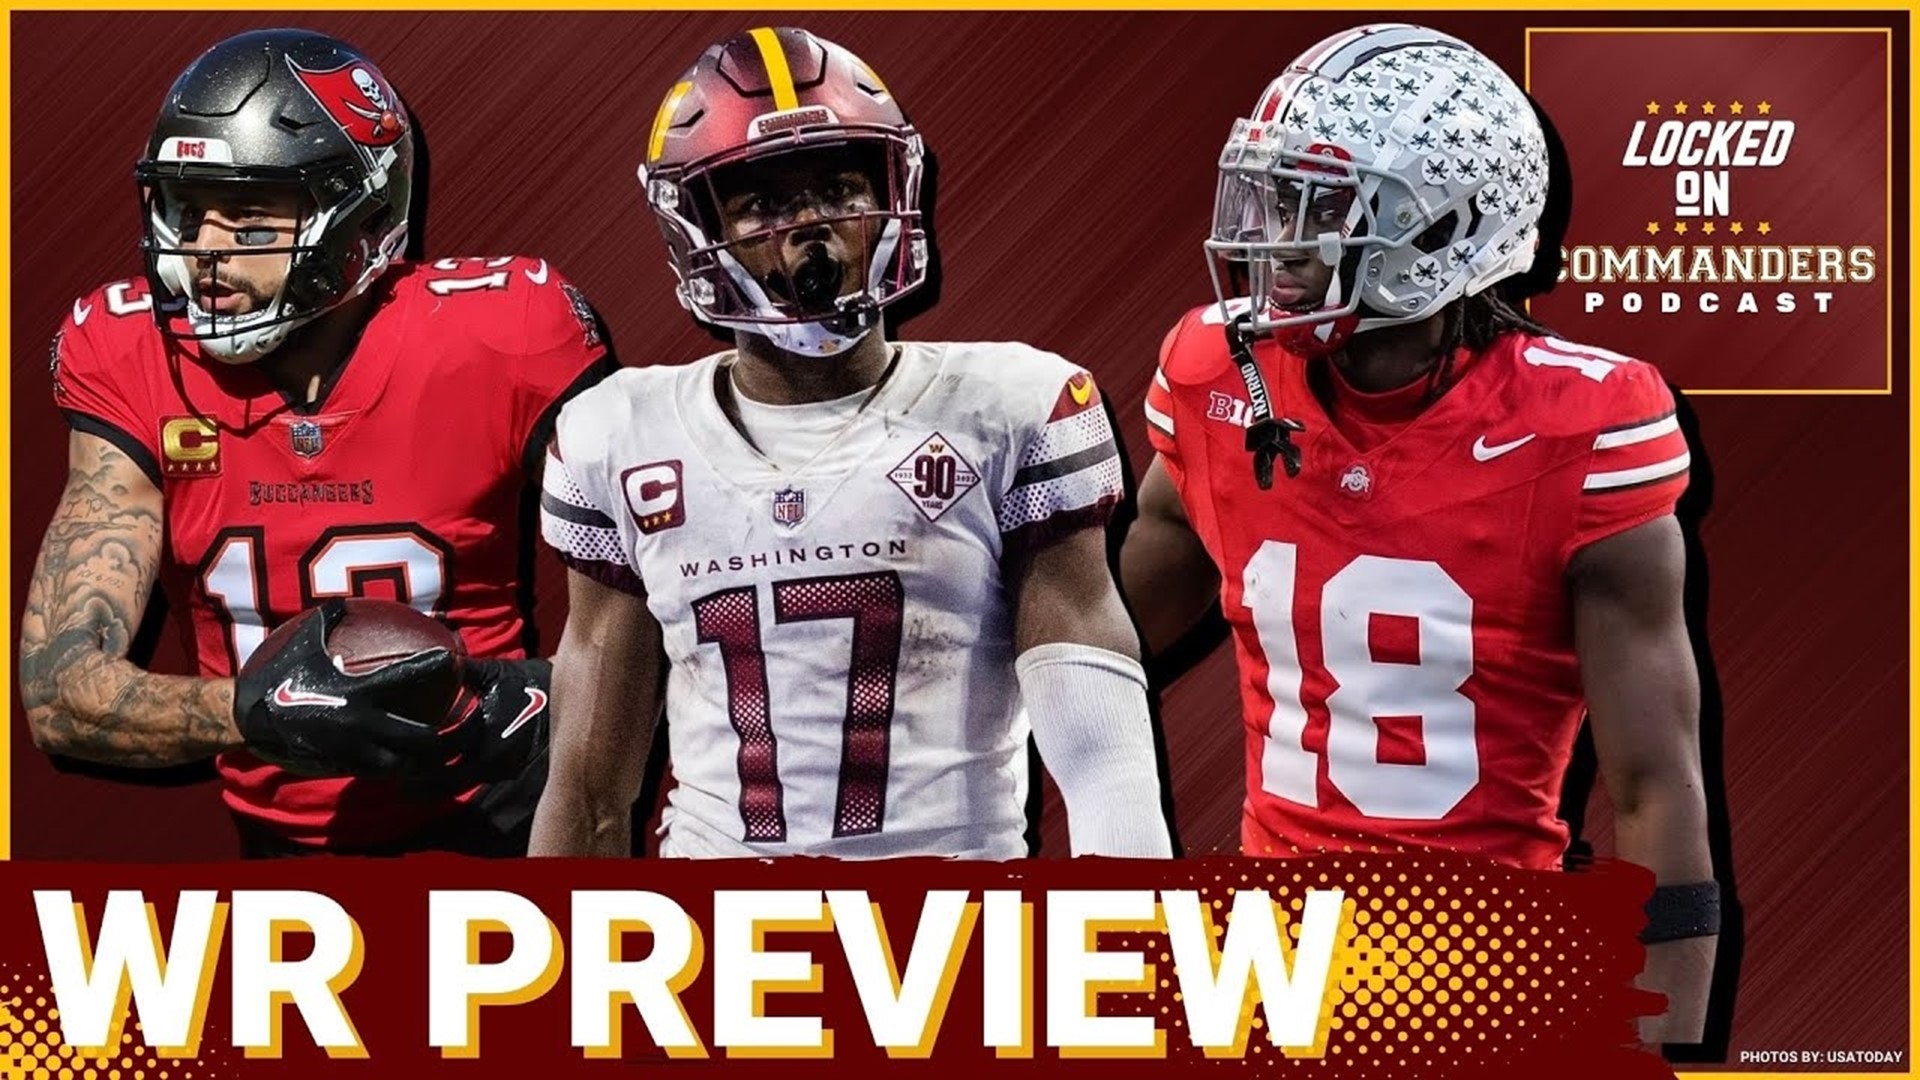 Previewing the Washington Commanders offseason through the lens of the wide receiver group with free agency and NFL Draft coming up.